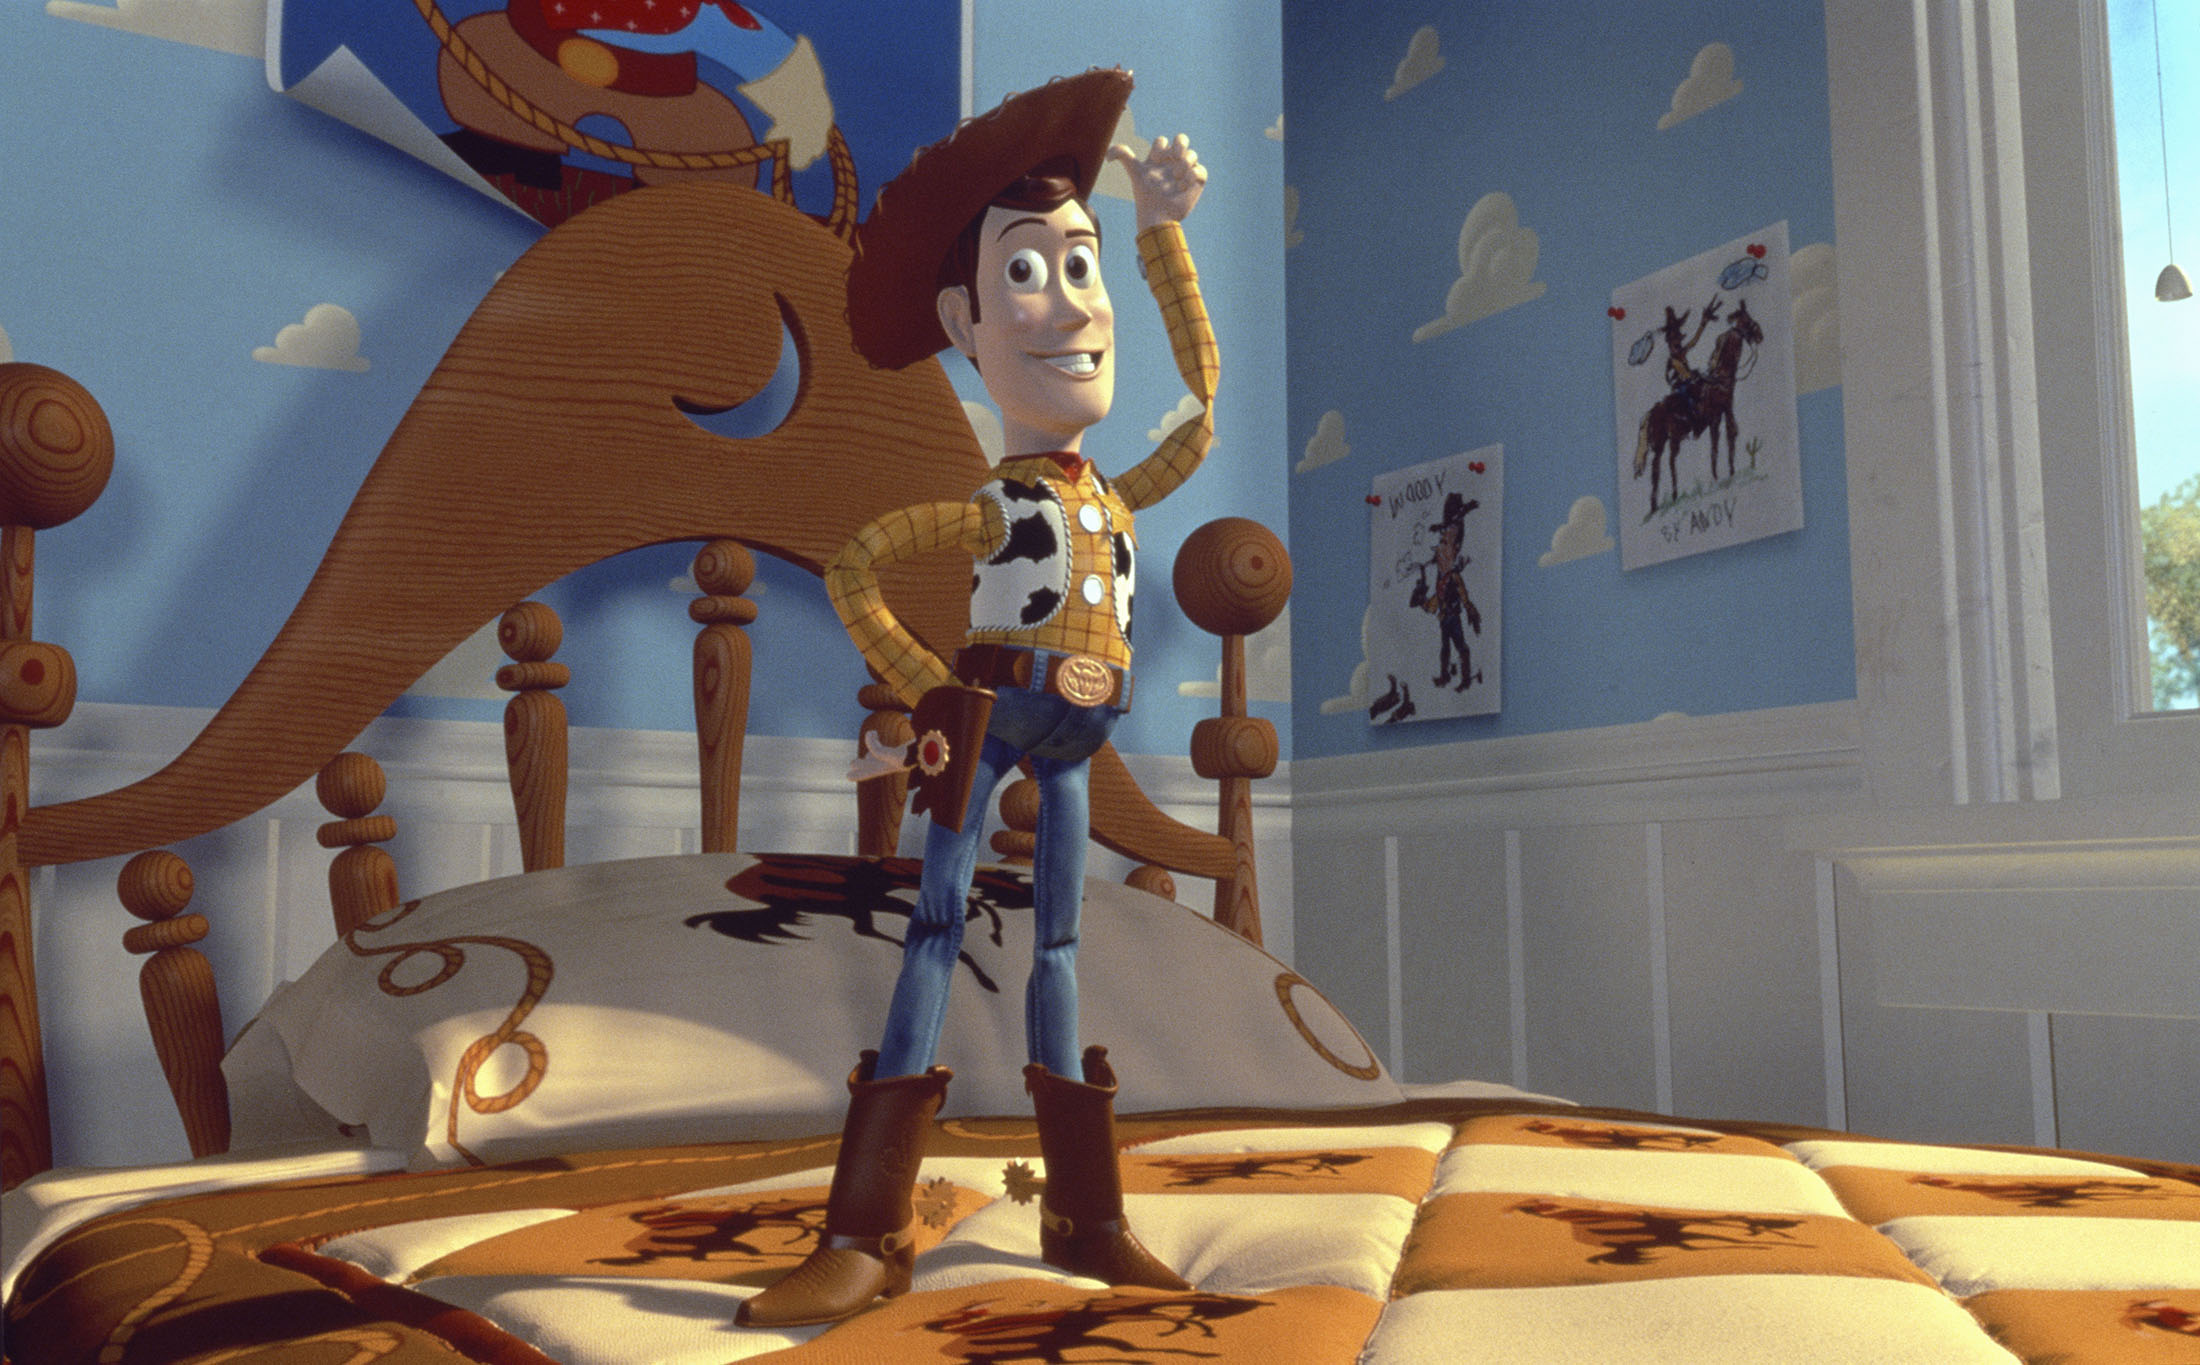 7 Things You May Not Know About Woody From Toy Story